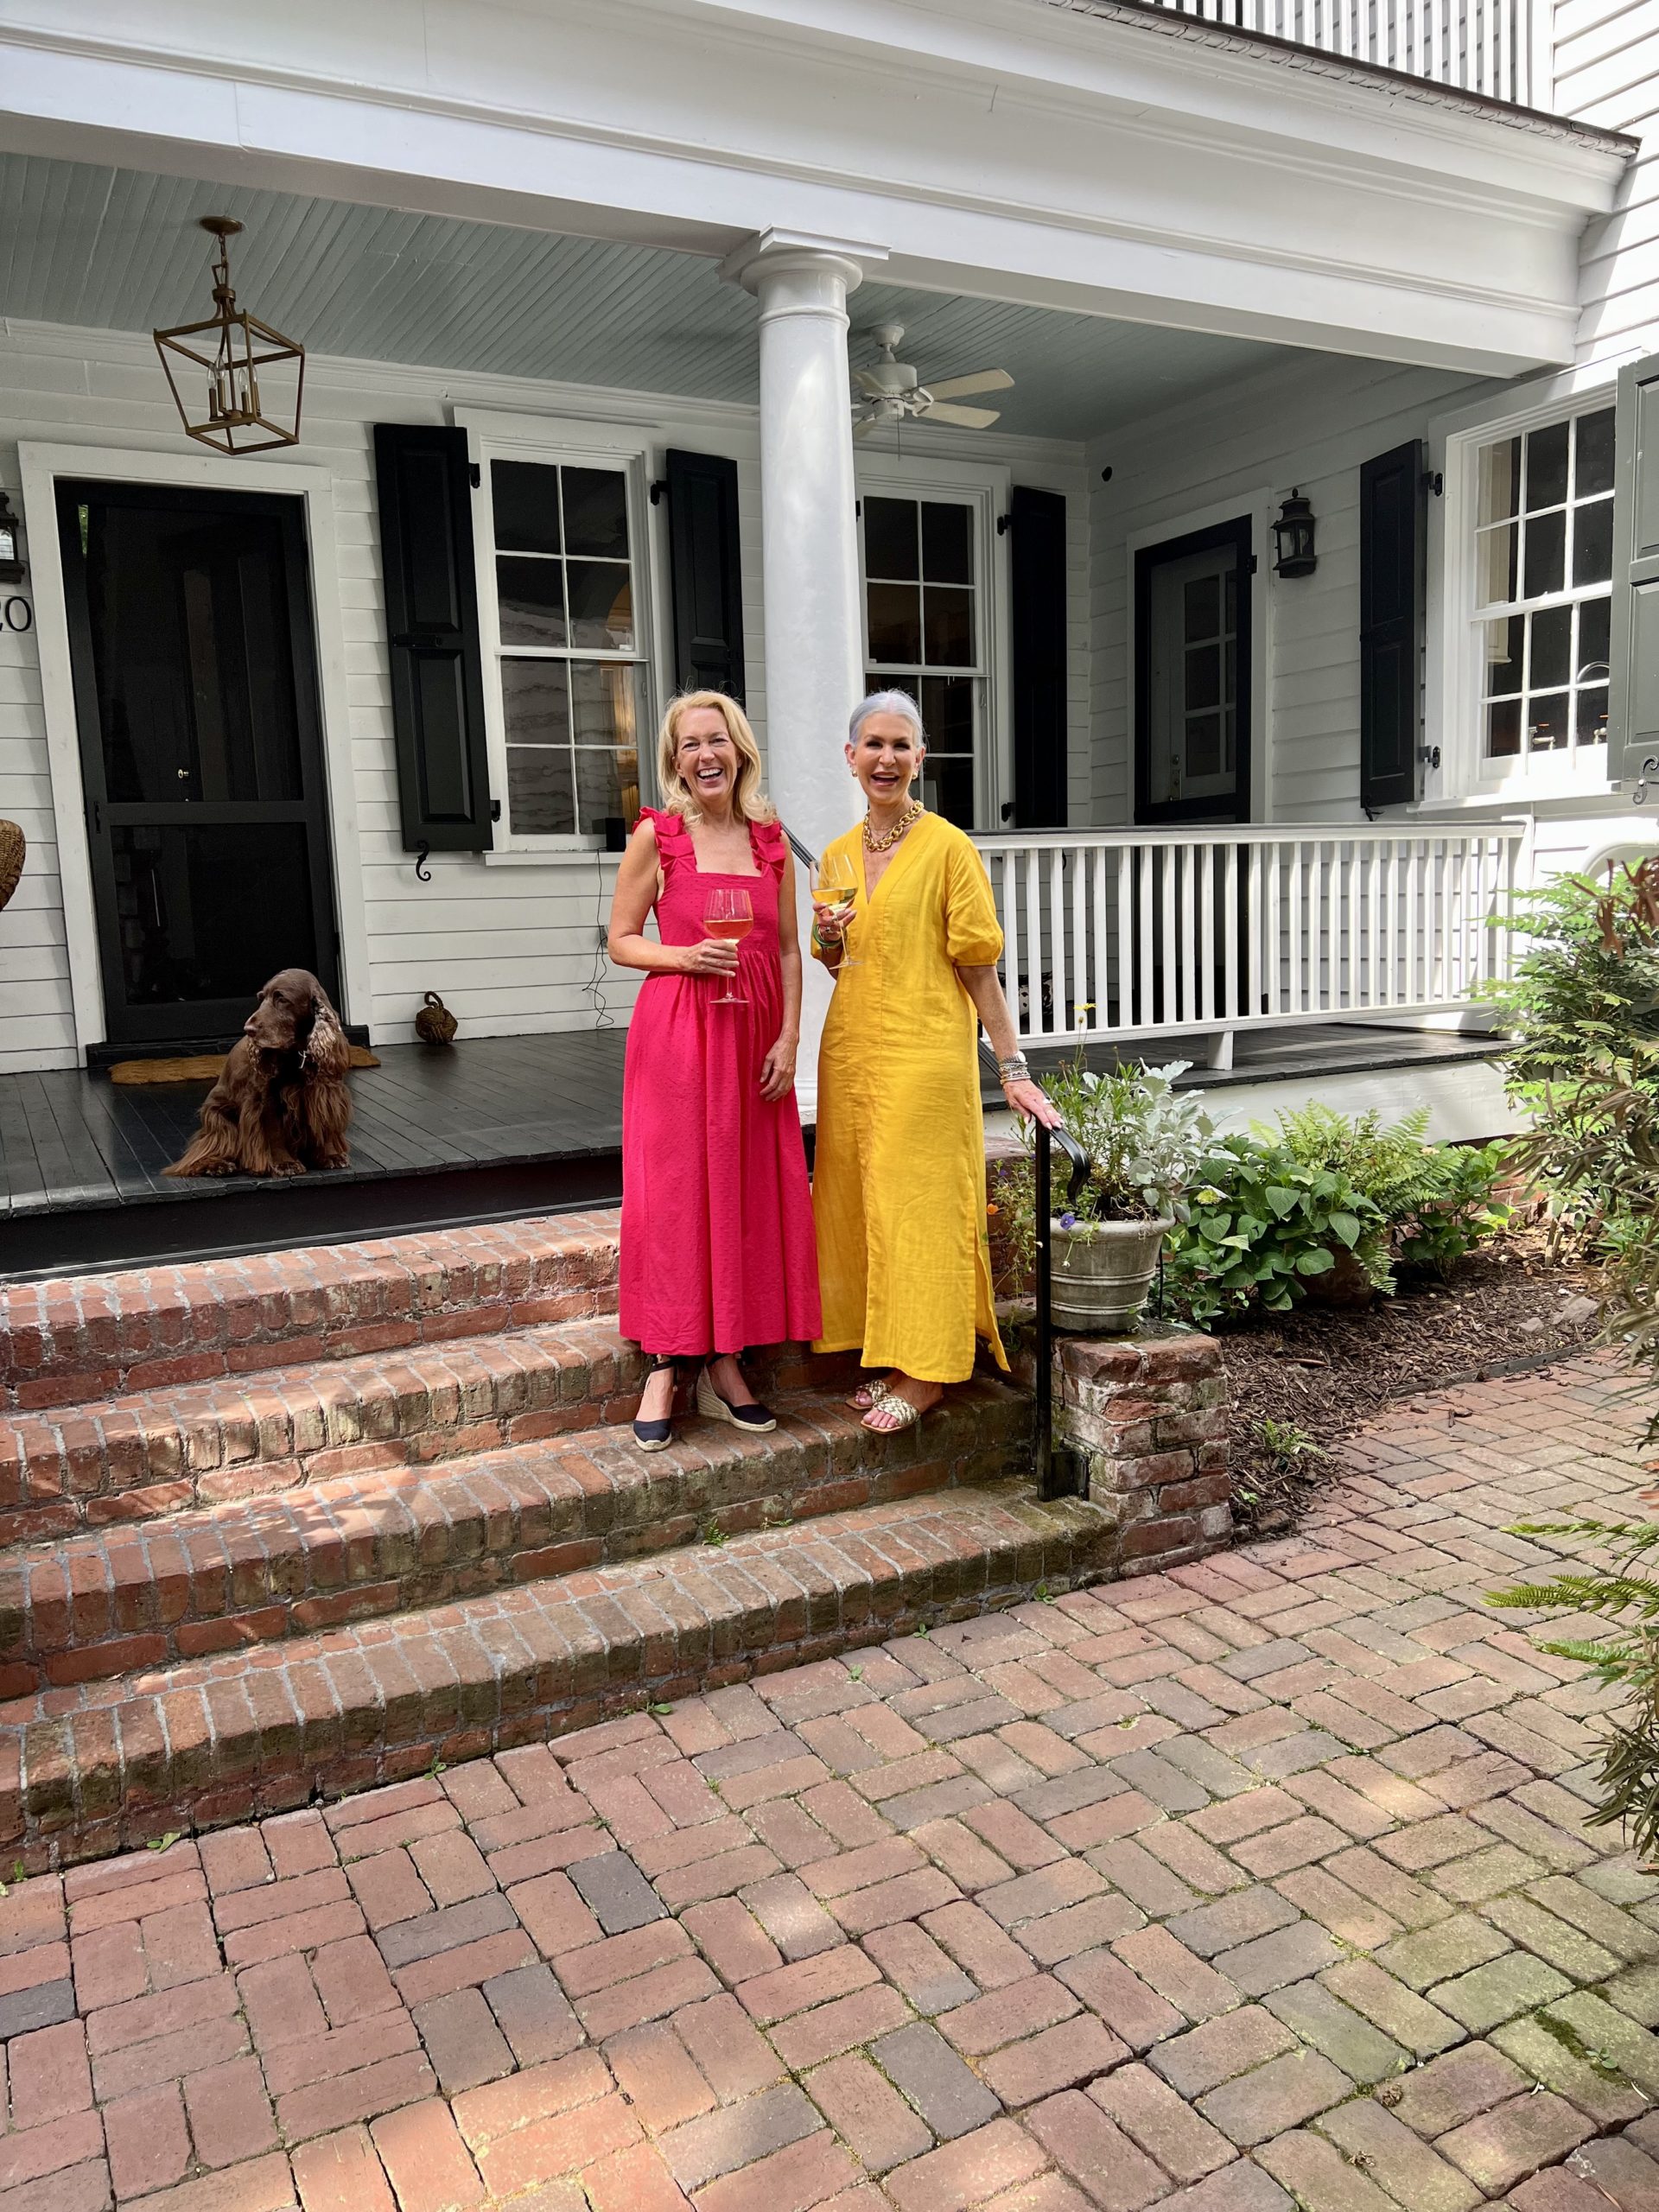 Ladies in front of house in dresses